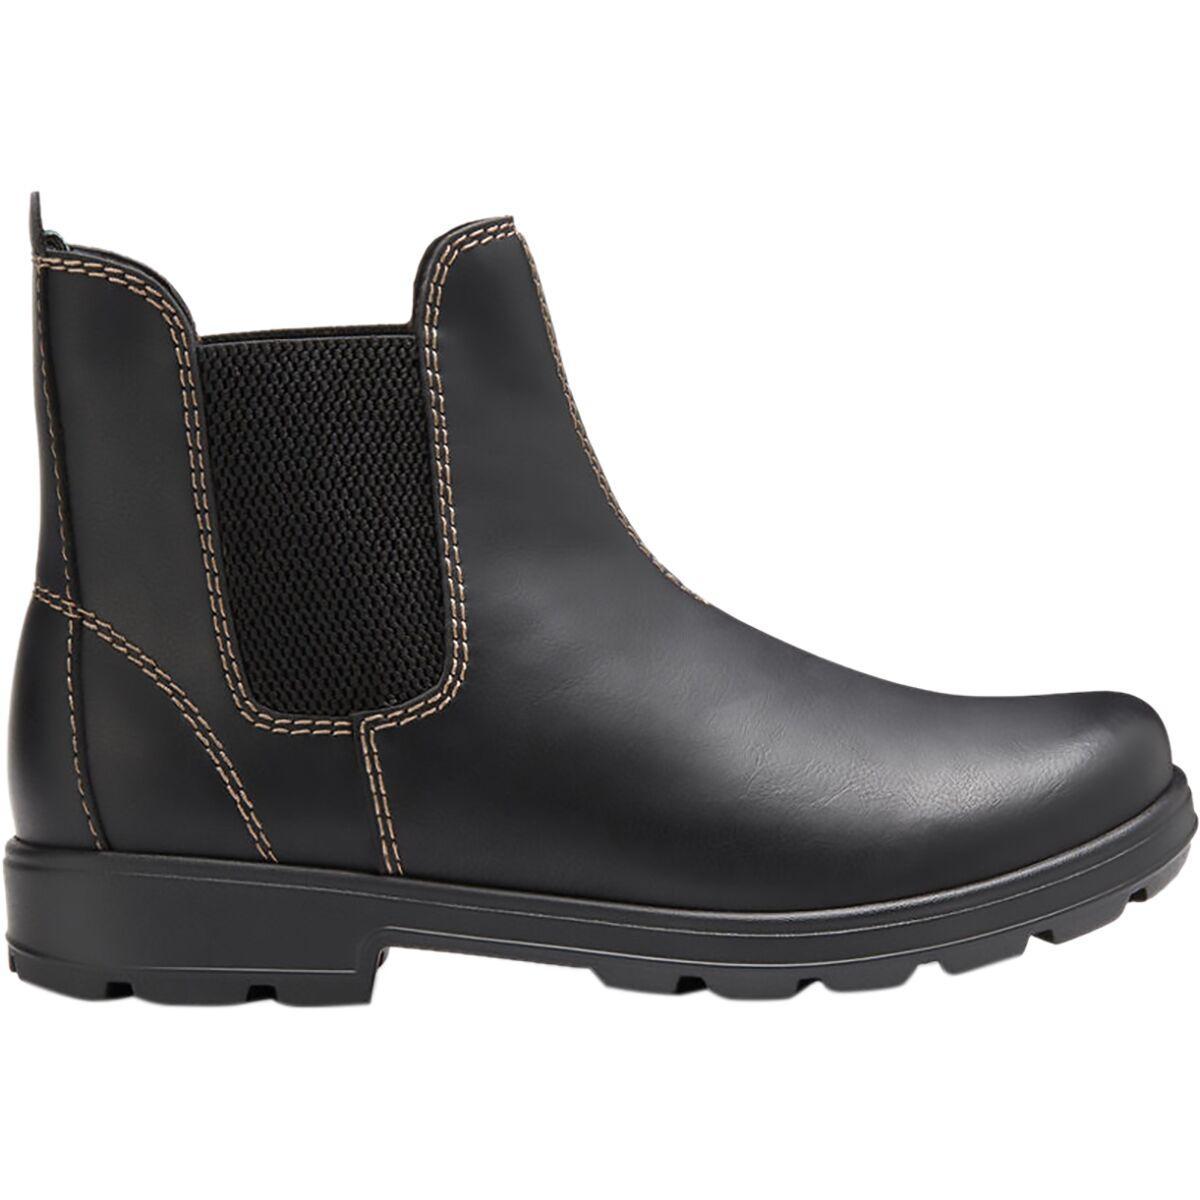 Cyrus Chelsea Boot - Men's Product Image